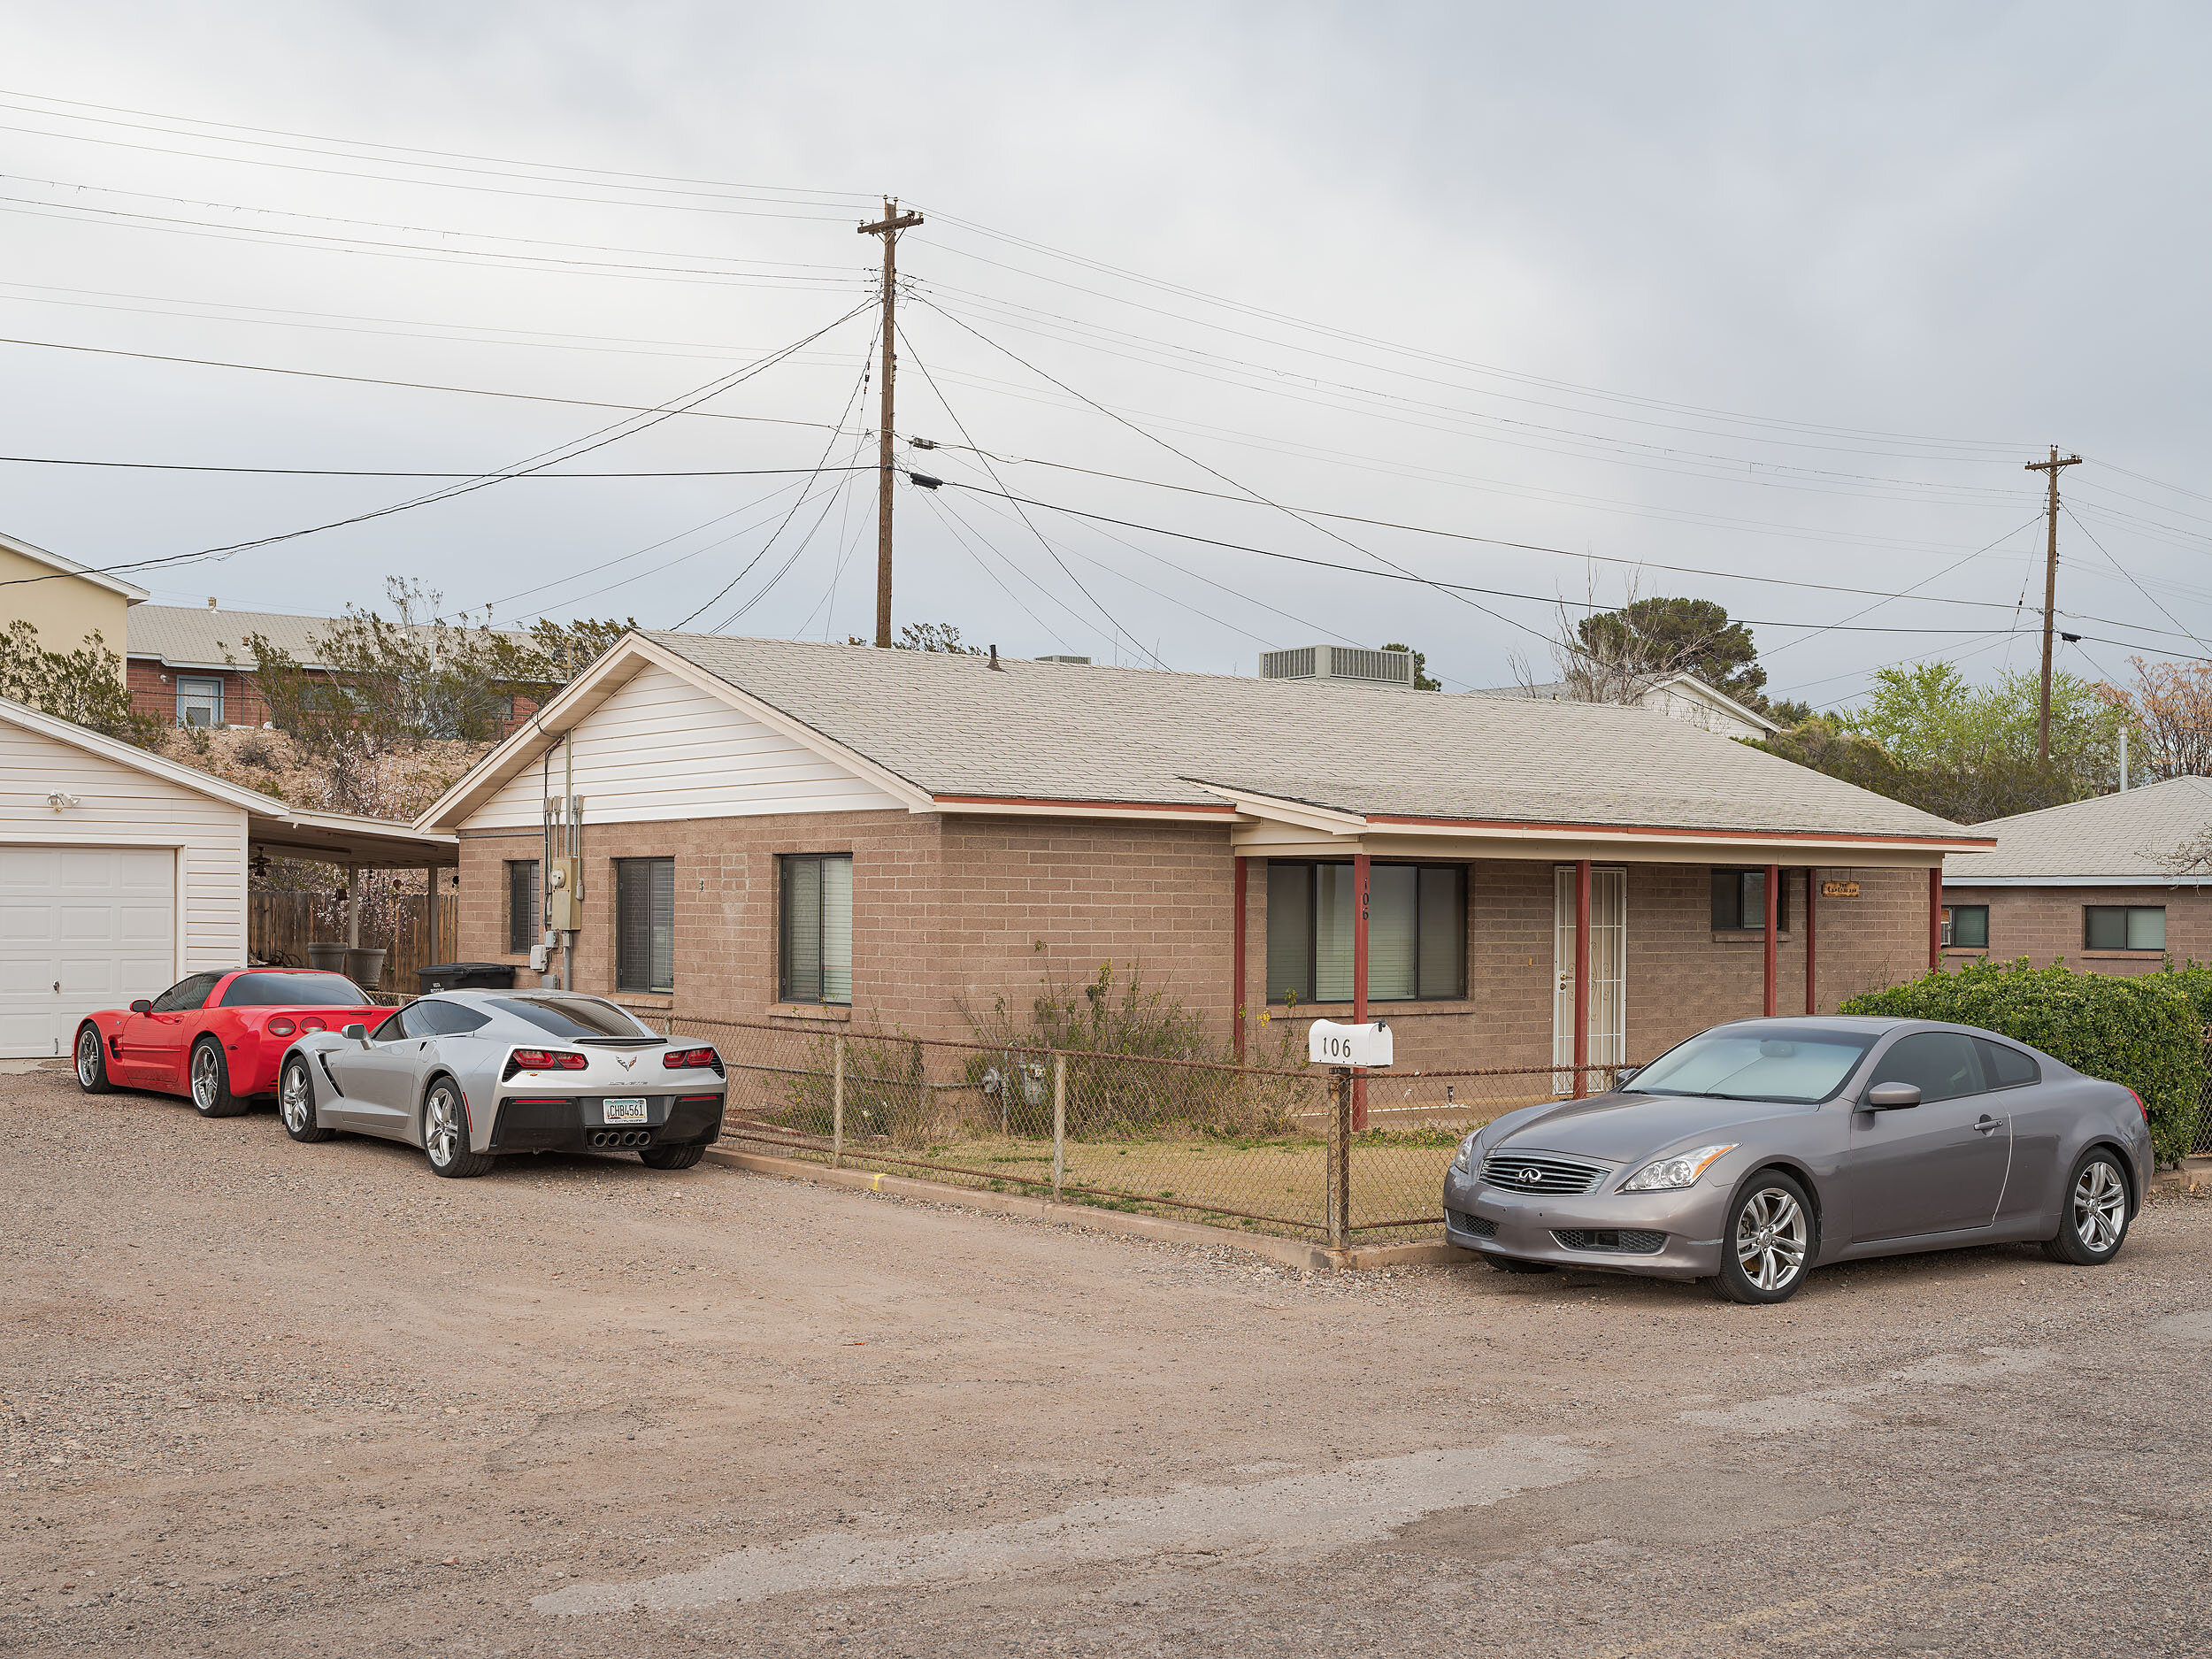  Muscle and luxury cars, parked at a Freeport-McMoran Morenci Home. The phrase "Morenci Rich" was used to describe a phenomena of excess spending given the high wages and low cost of living for mine workers. 